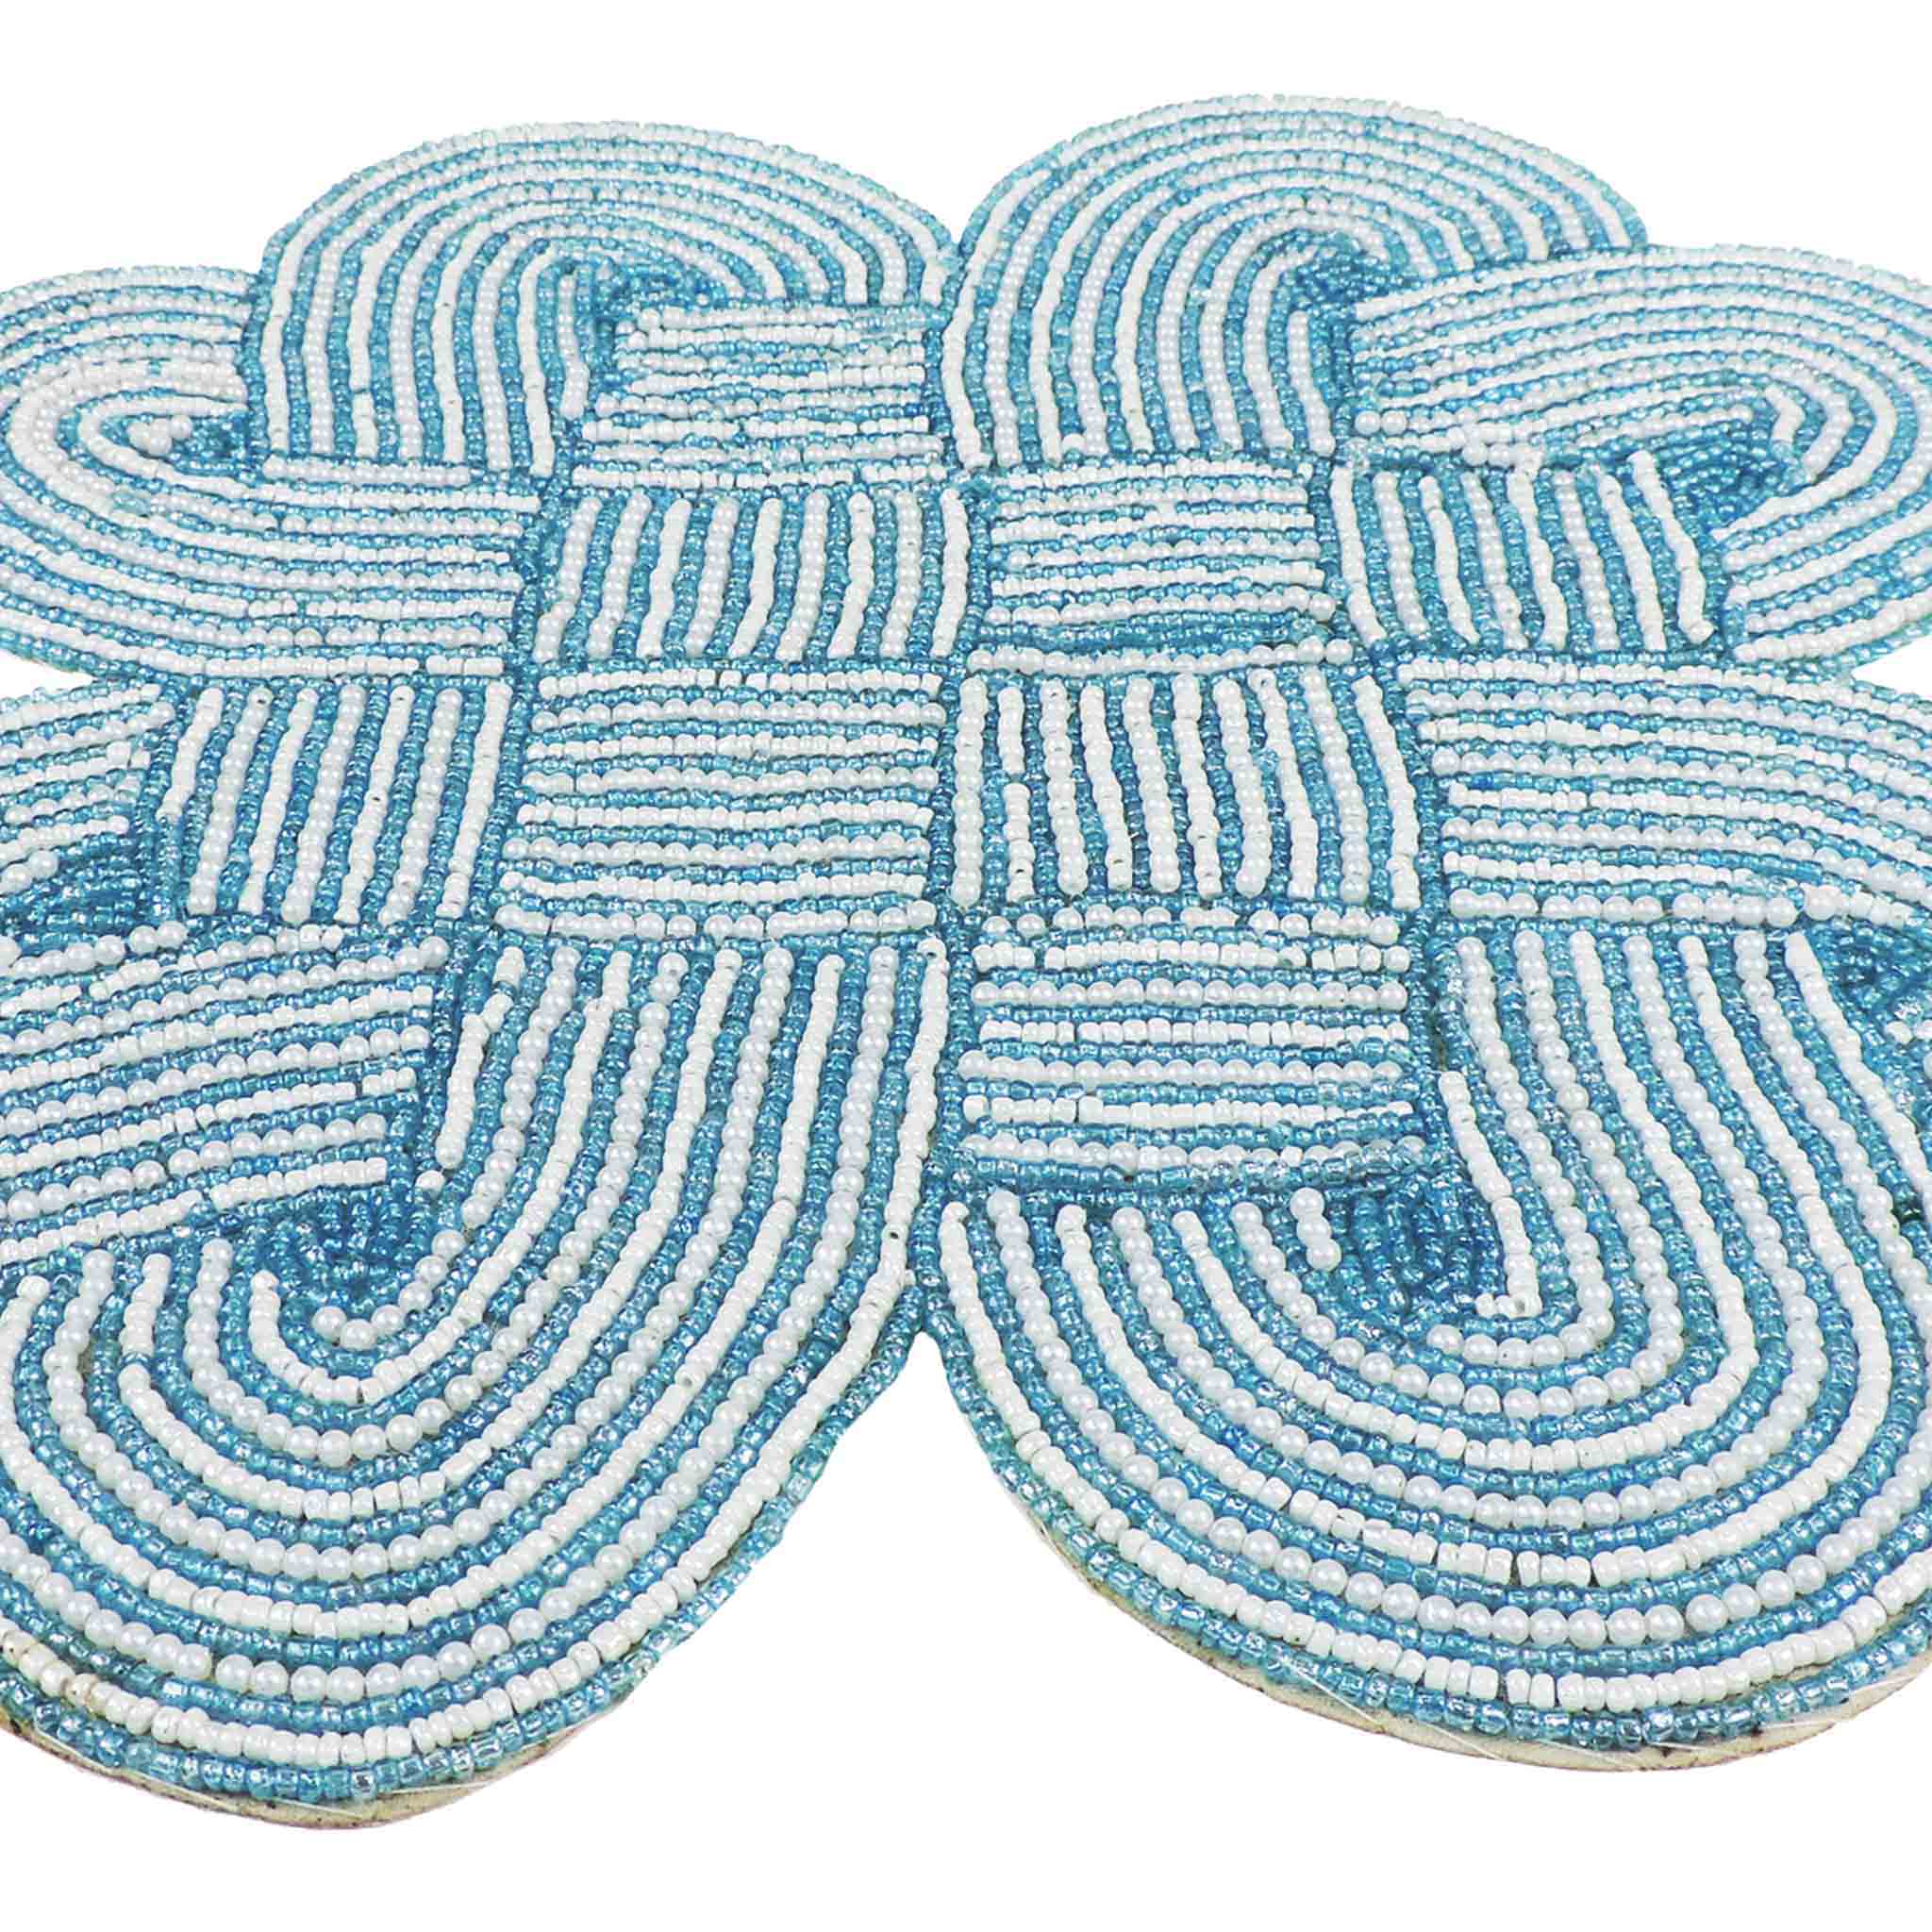 Celtic Knot Bead Embroidered Placemat in Teal & Cream, Set of 2/4